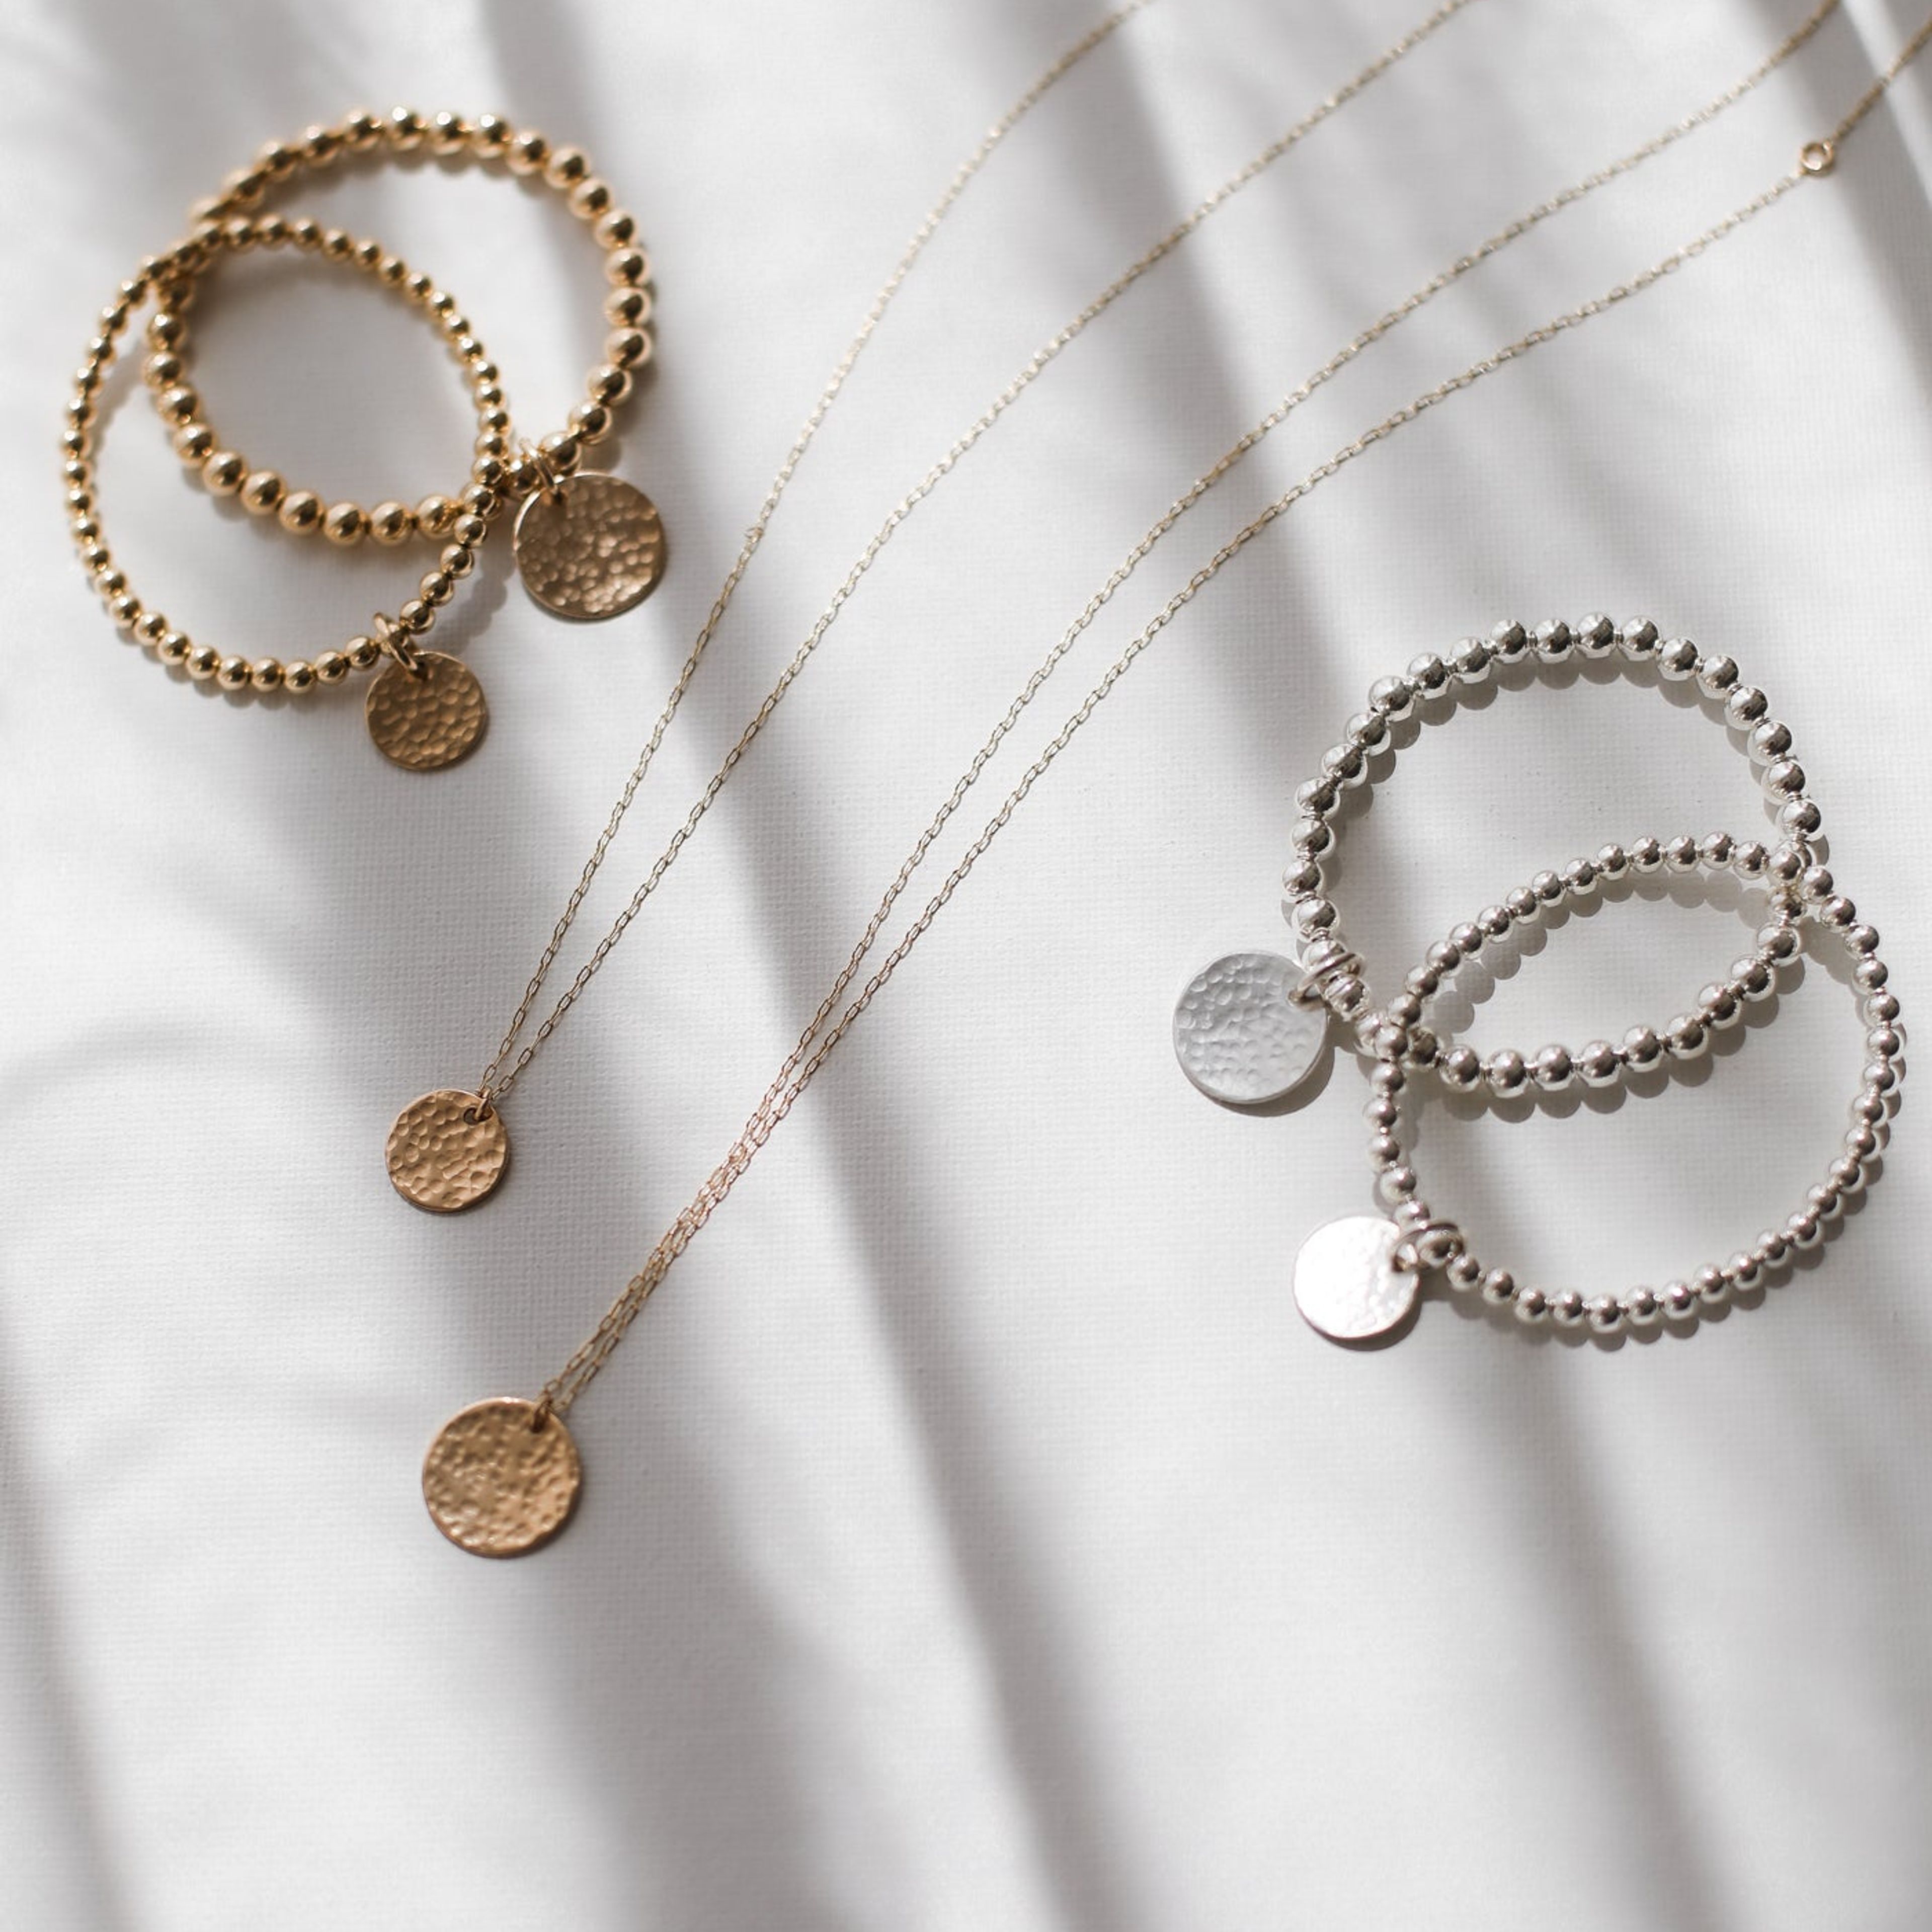 The Hammered Coin Necklace - Gold